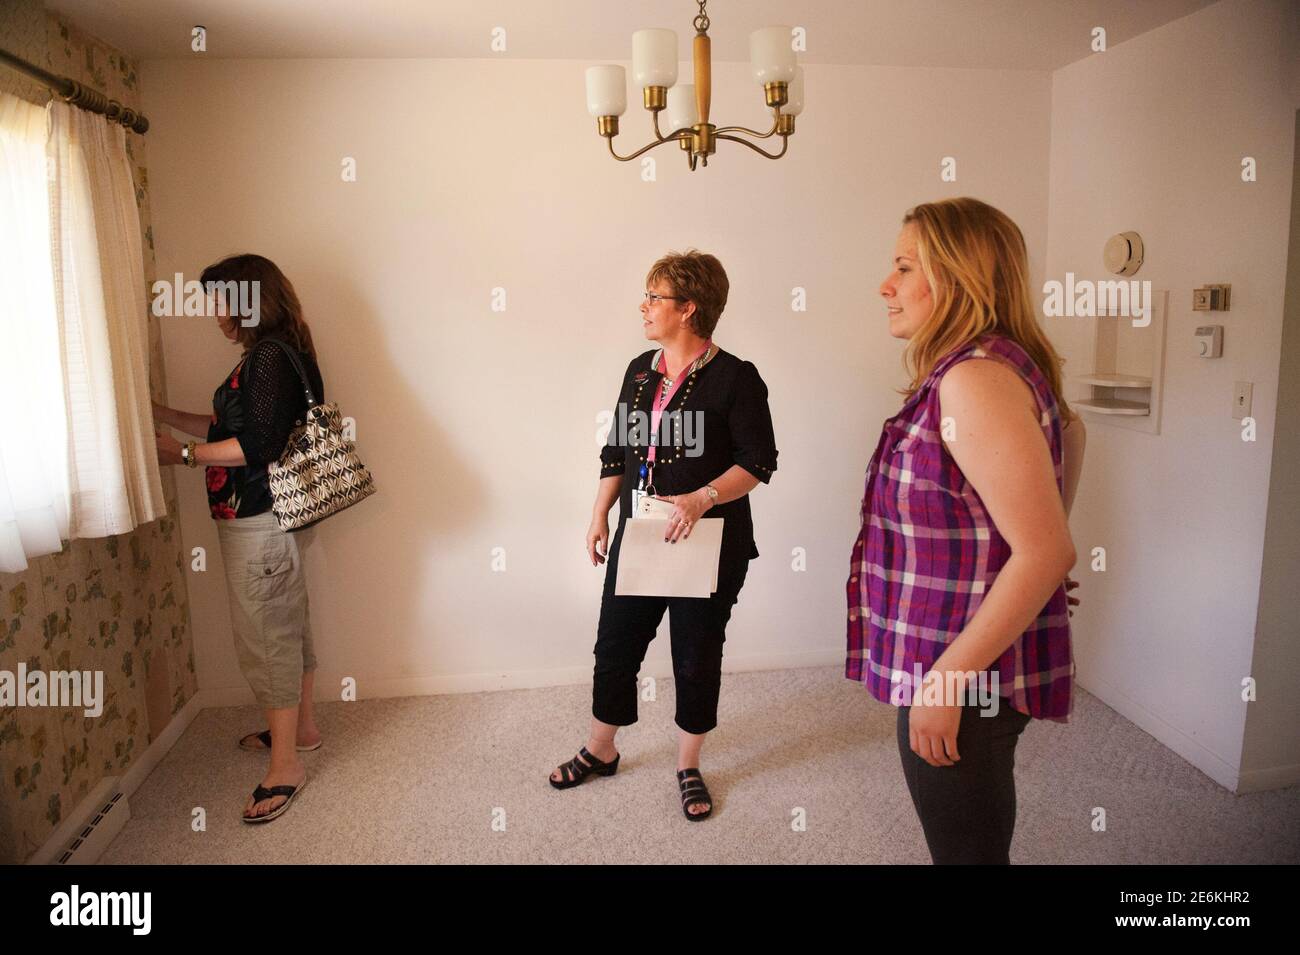 Real estate broker Lorrie Nantt (Center) shows a house to prospective buyers in Dickinson, North Dakota June 26, 2015. Nantt and her business partner, Marie Swenson, opened a RE/MAX franchise in 2014. The women of North Dakota's oil patch are fighting back. In dozens of interviews, women across the No. 2 U.S. oil producing state are flatly rejecting the widespread perception that prostitution or stripping are their only career paths amidst the bustle of the stereotypically male-dominated oilfield economy.  REUTERS/Andrew Cullen Stock Photo